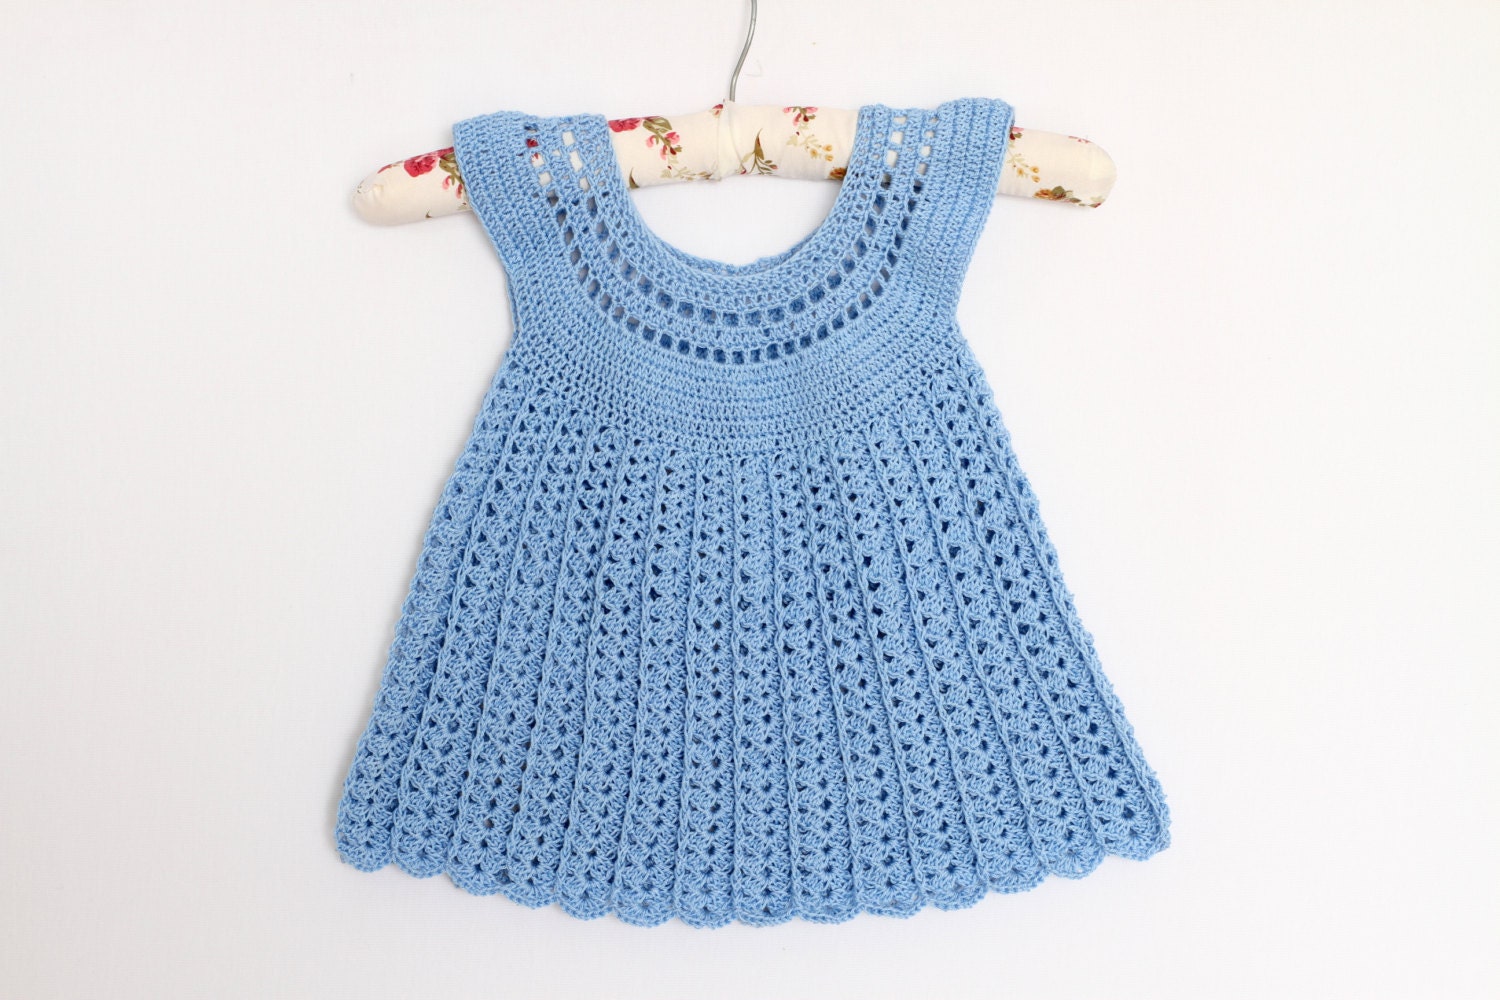 Crochet for Girls: 23 Dresses, Sweaters, and Accessories - 9780811736510